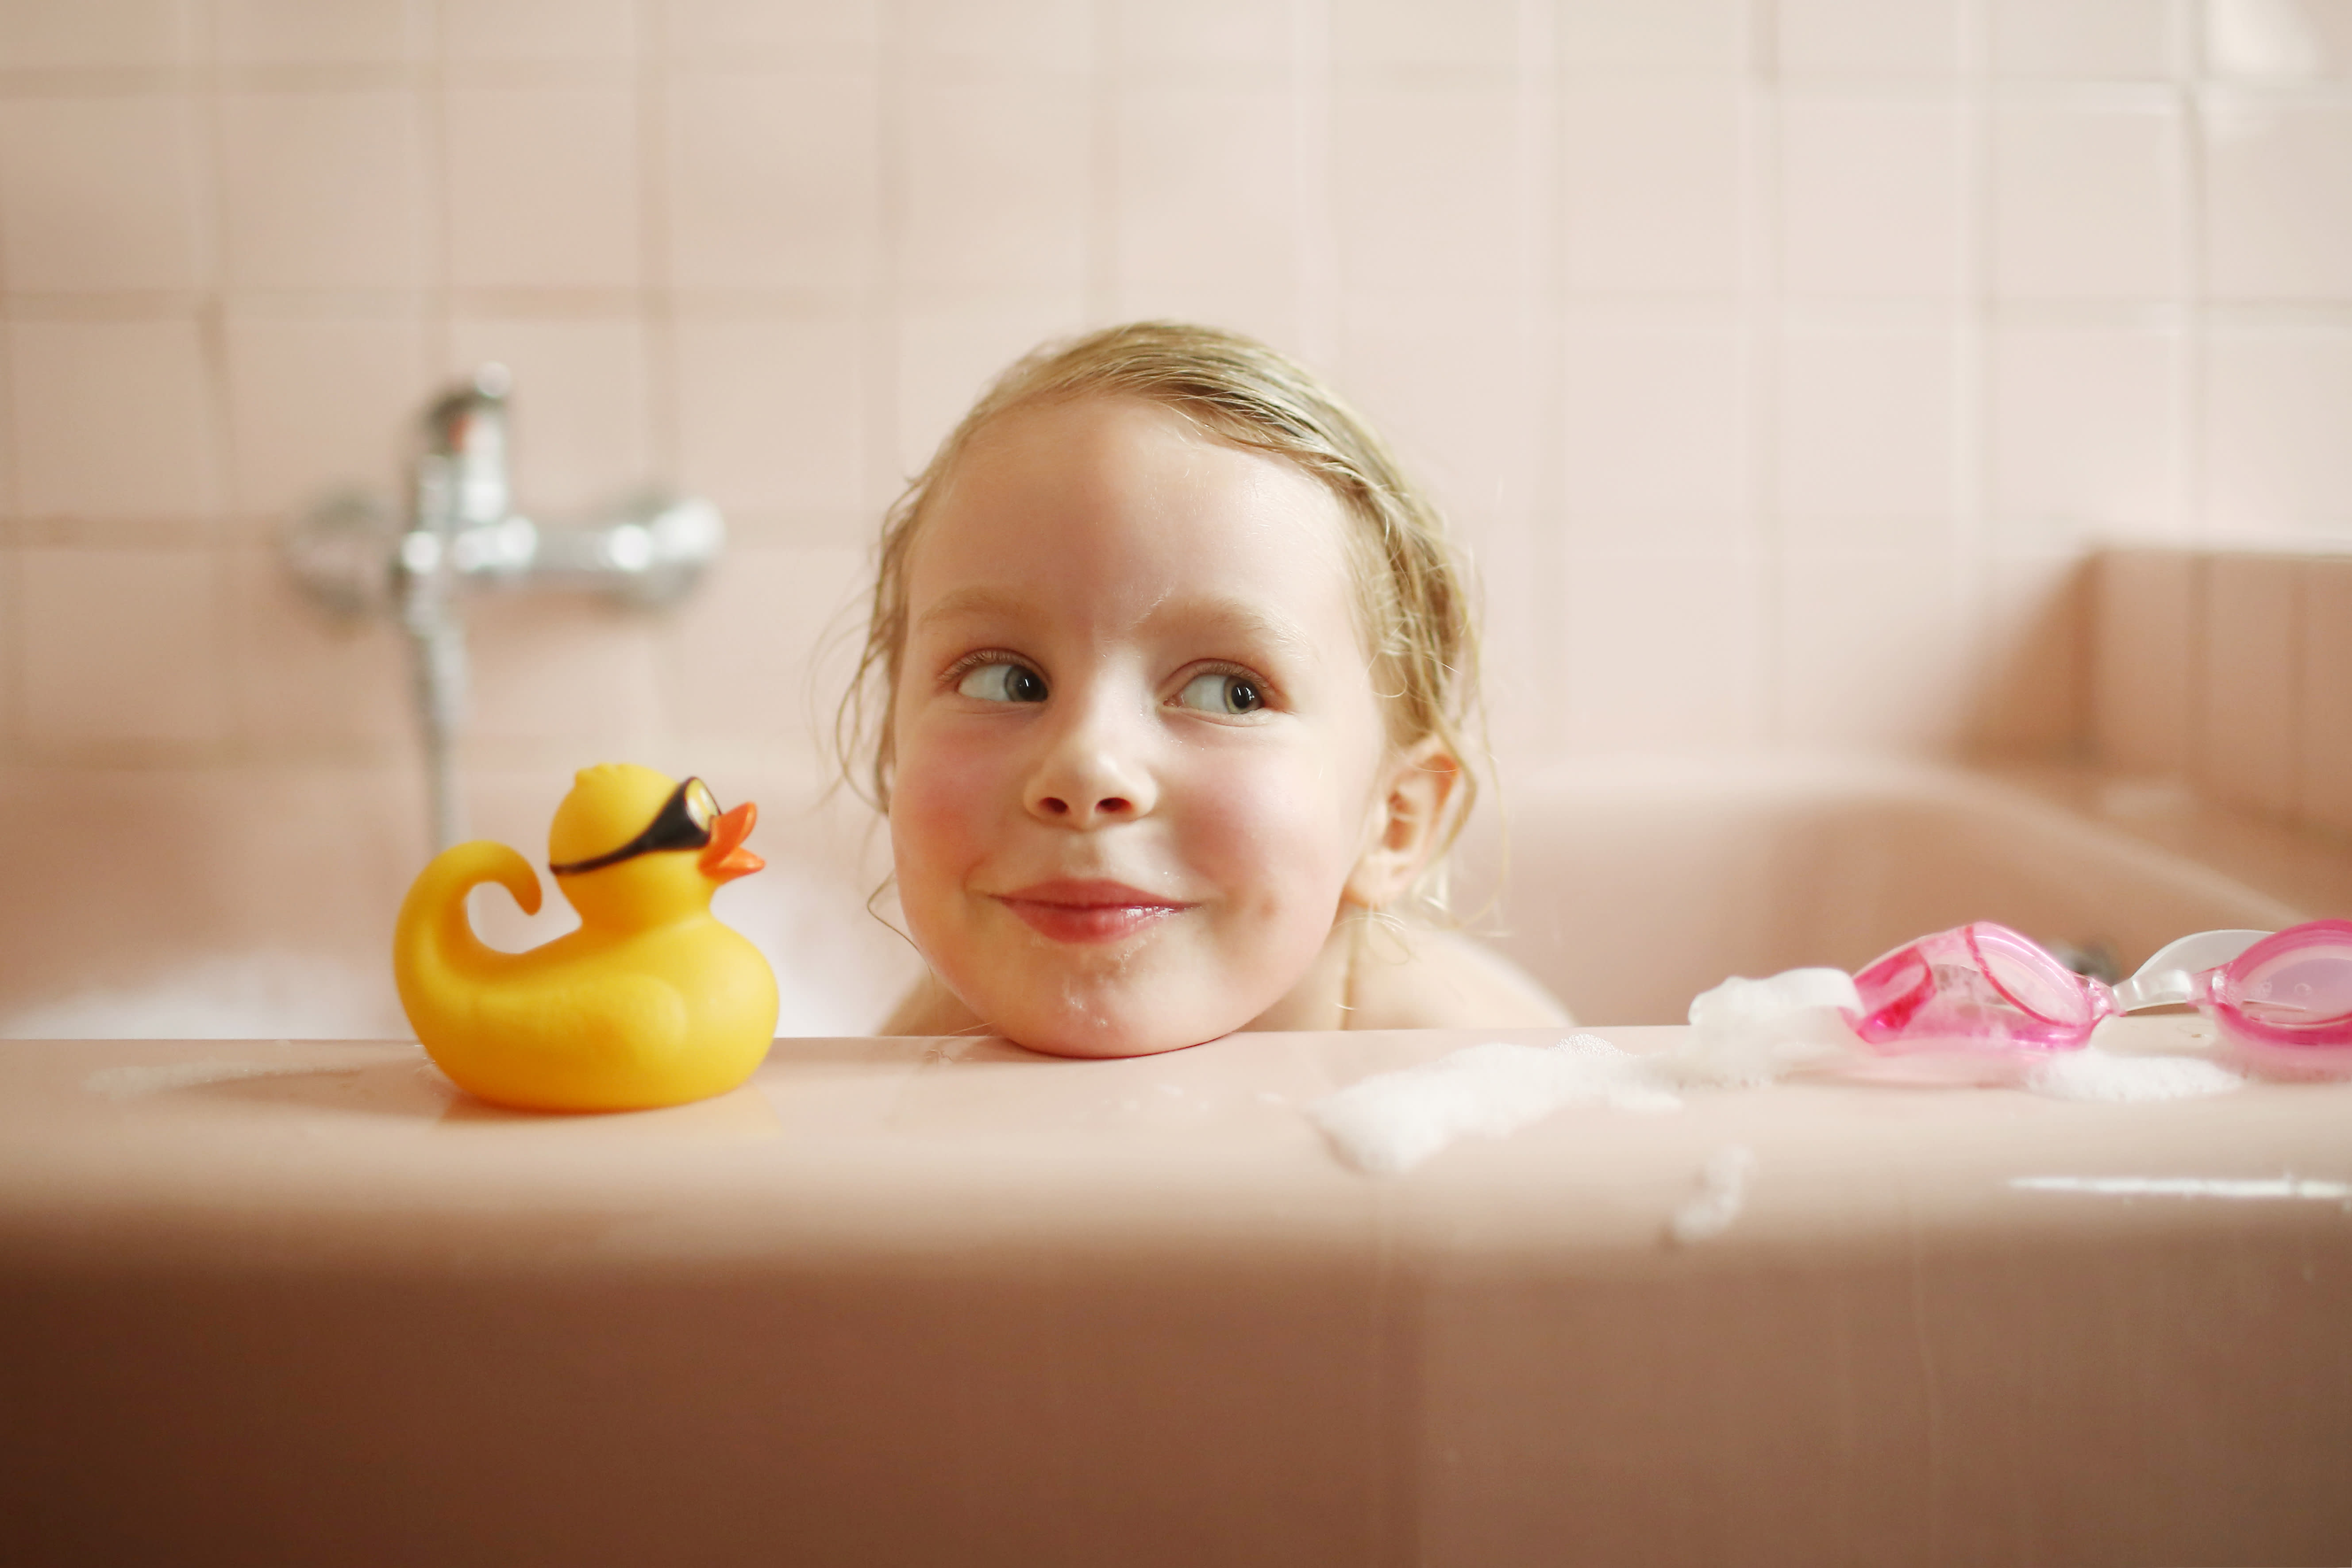 Mold in Bath Toys: Tips for Cleaning and Preventing